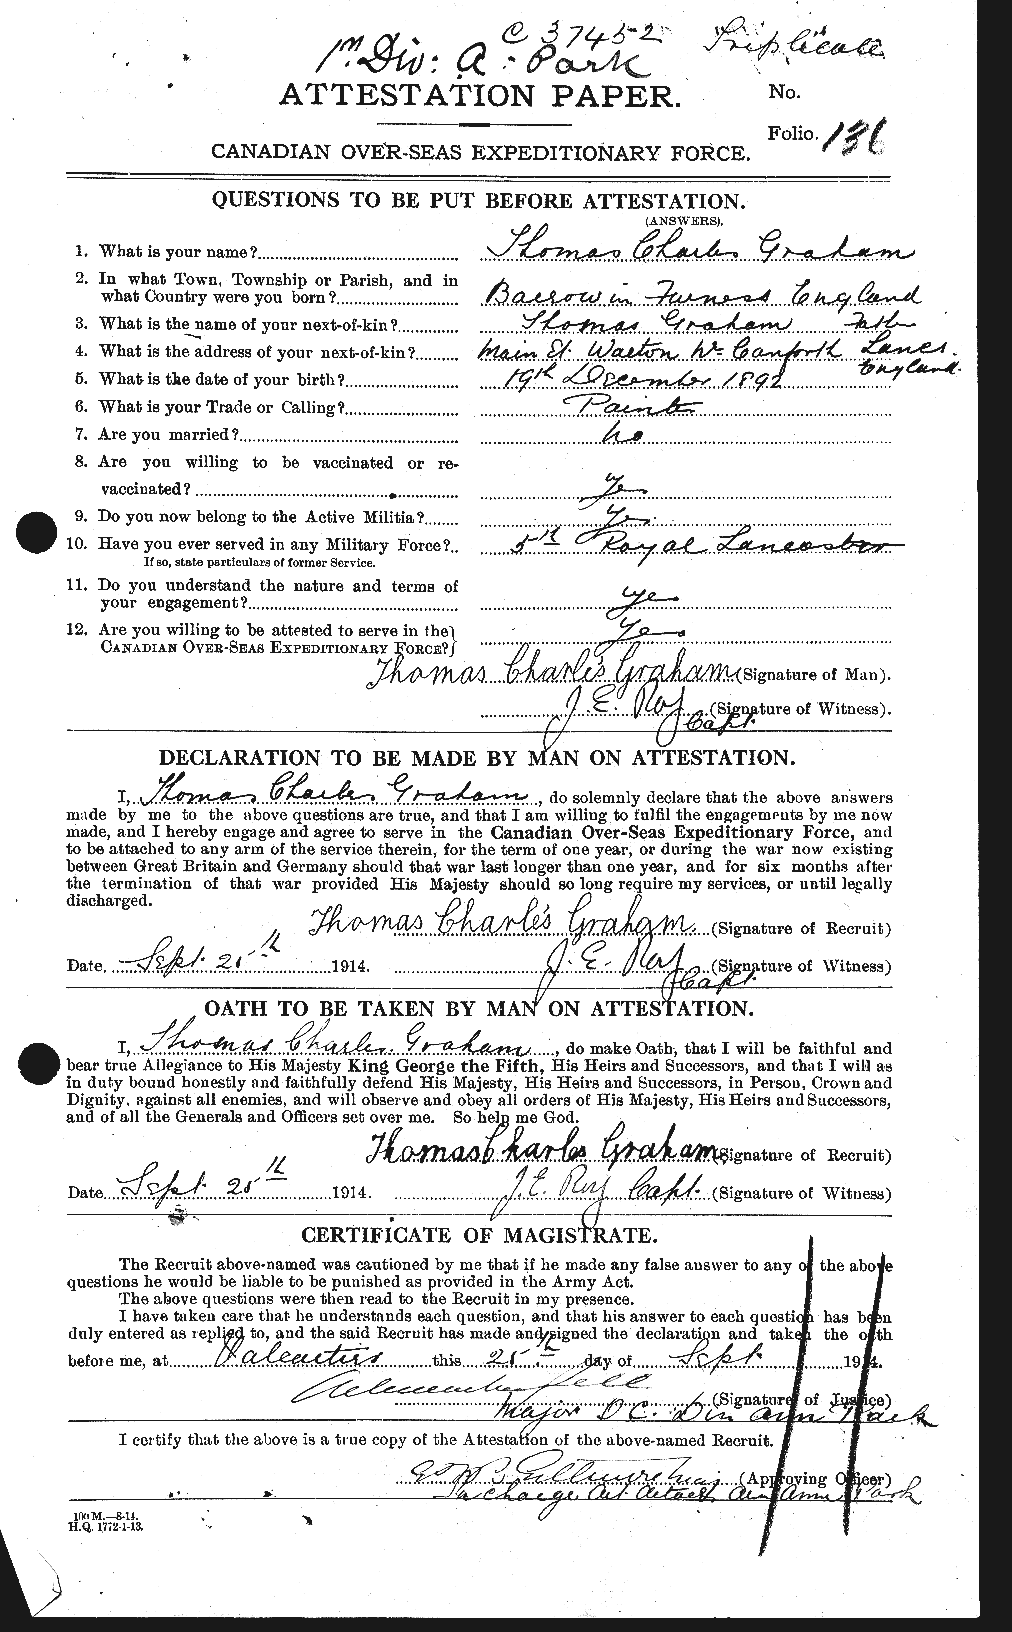 Personnel Records of the First World War - CEF 359511a